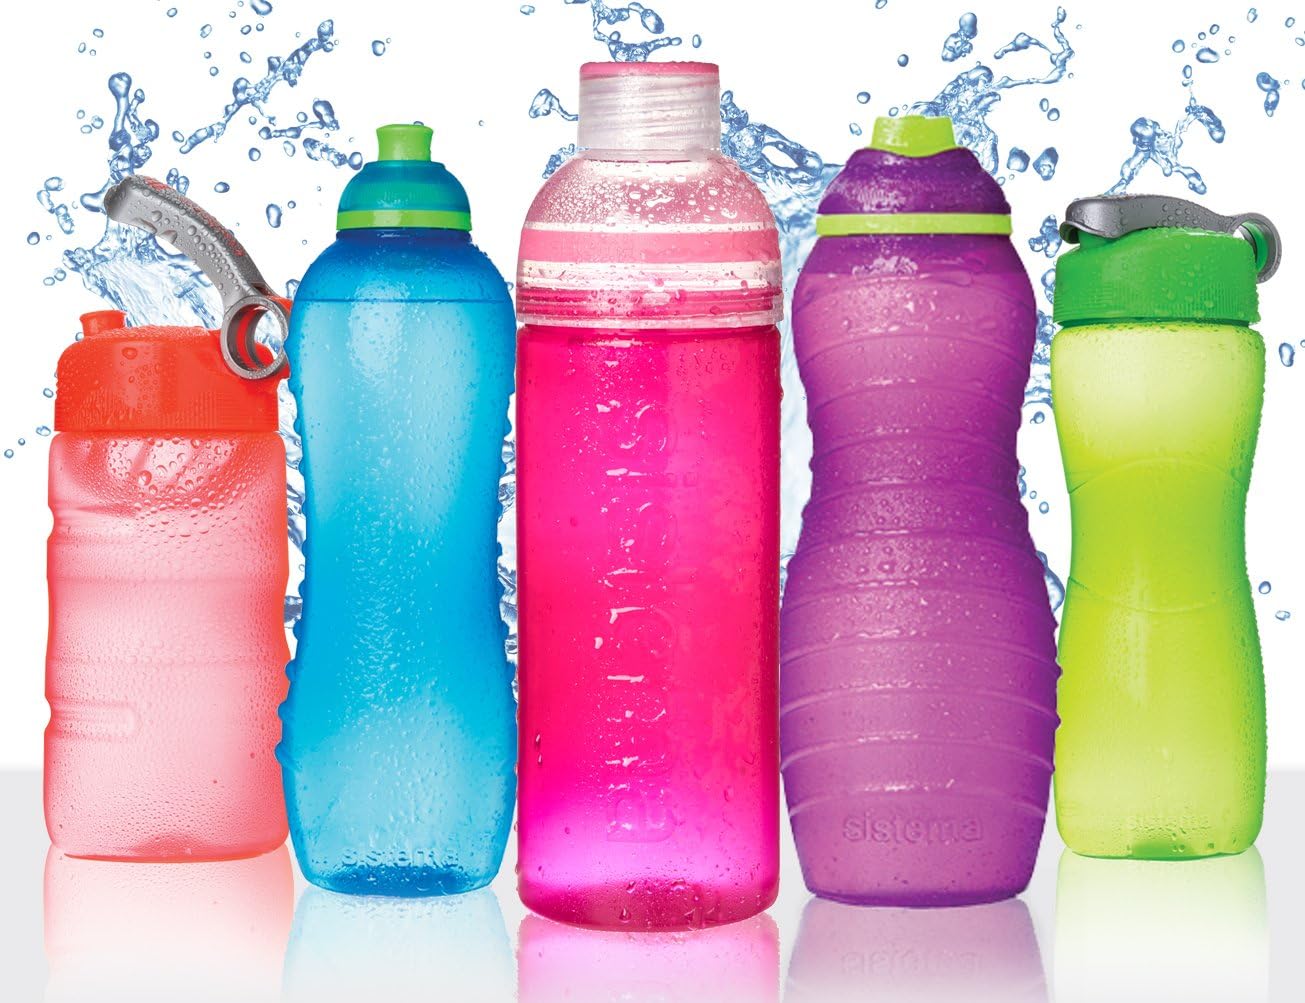 Reusable Water Bottles and Eco-Friendly Lunch Containers